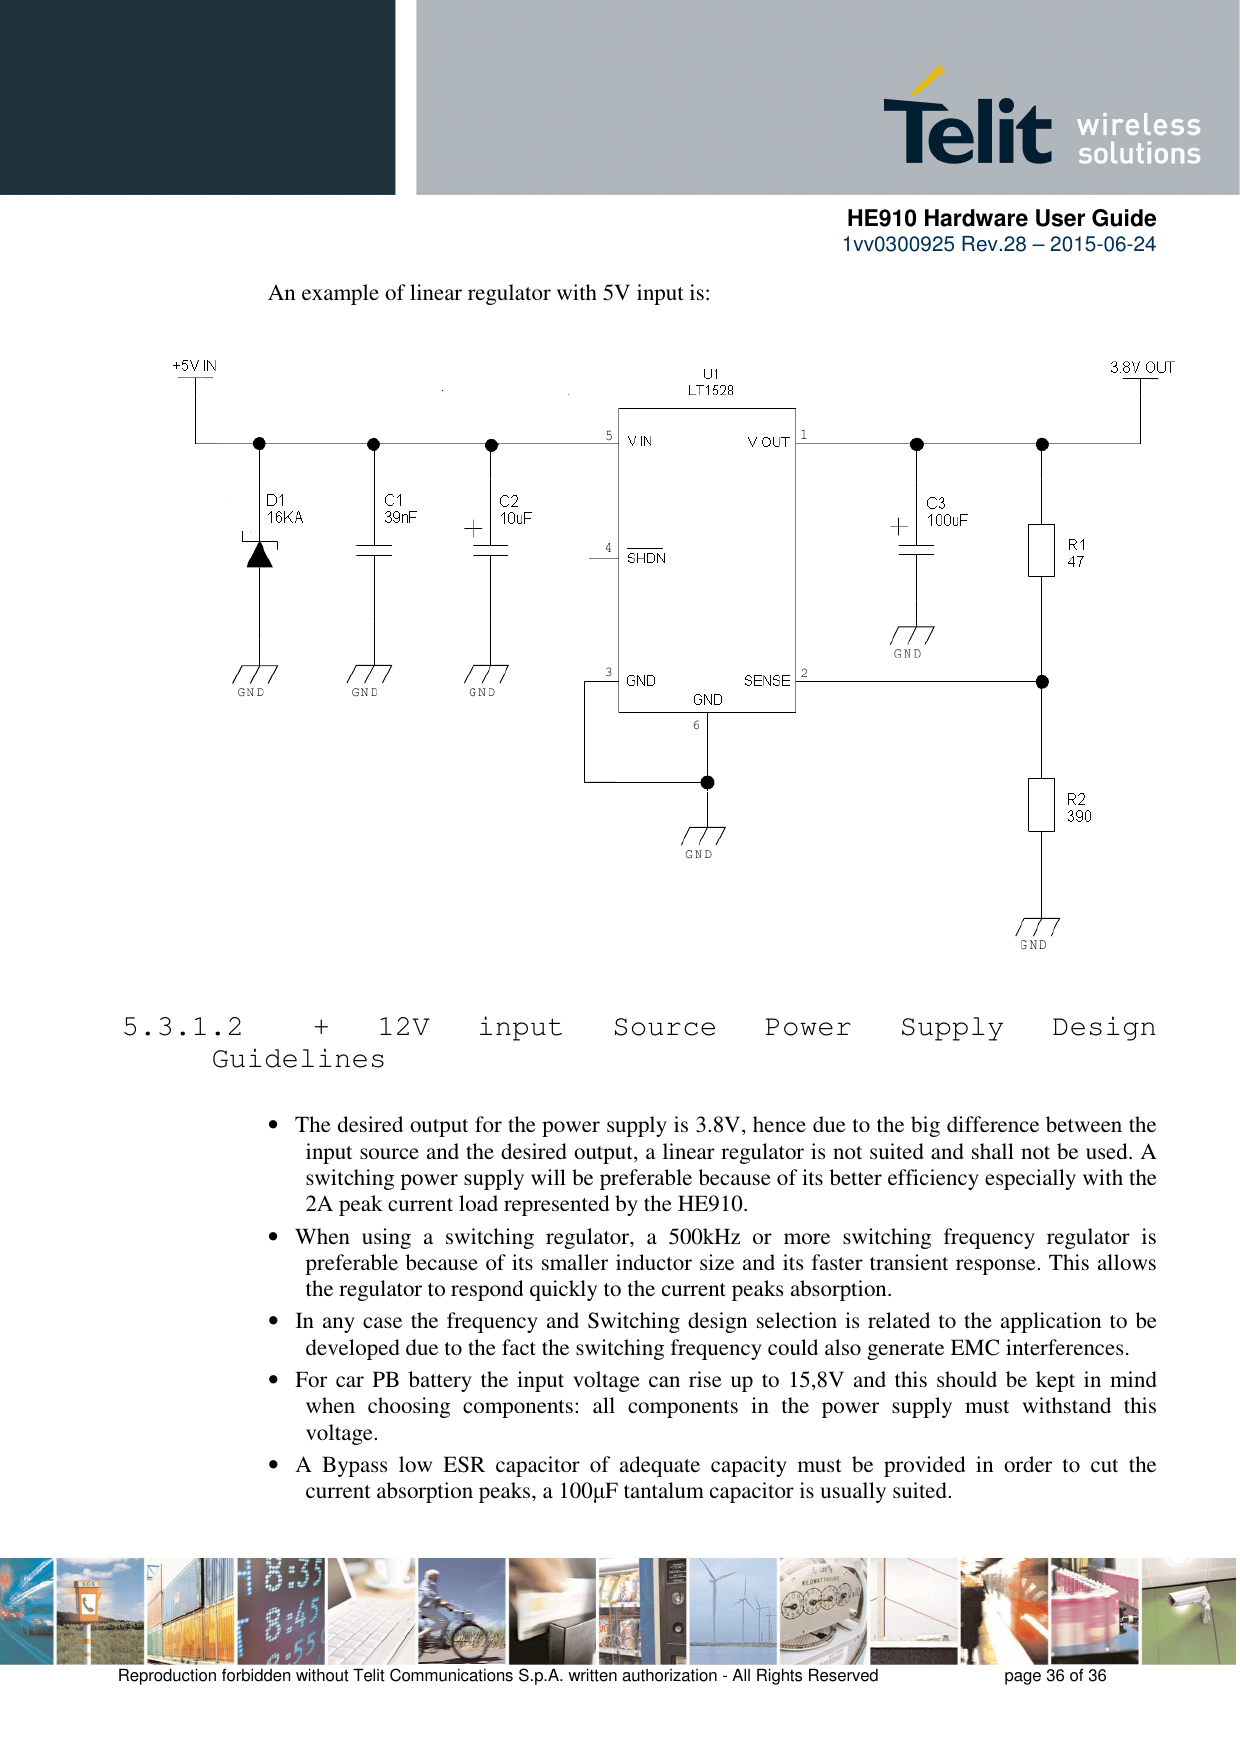      HE910 Hardware User Guide 1vv0300925 Rev.28 – 2015-06-24    Reproduction forbidden without Telit Communications S.p.A. written authorization - All Rights Reserved    page 36 of 36  An example of linear regulator with 5V input is:    5.3.1.2  +  12V  input  Source  Power  Supply  Design Guidelines  • The desired output for the power supply is 3.8V, hence due to the big difference between the input source and the desired output, a linear regulator is not suited and shall not be used. A switching power supply will be preferable because of its better efficiency especially with the 2A peak current load represented by the HE910. • When  using  a  switching  regulator,  a  500kHz  or  more  switching  frequency  regulator  is preferable because of its smaller inductor size and its faster transient response. This allows the regulator to respond quickly to the current peaks absorption.  • In any case the frequency and Switching design selection is related to the application to be developed due to the fact the switching frequency could also generate EMC interferences. • For car PB battery the input voltage can rise up to 15,8V and this should be kept in mind when  choosing  components:  all  components  in  the  power  supply  must  withstand  this voltage. • A  Bypass  low  ESR  capacitor  of  adequate  capacity  must  be  provided  in  order  to  cut  the current absorption peaks, a 100µF tantalum capacitor is usually suited. 